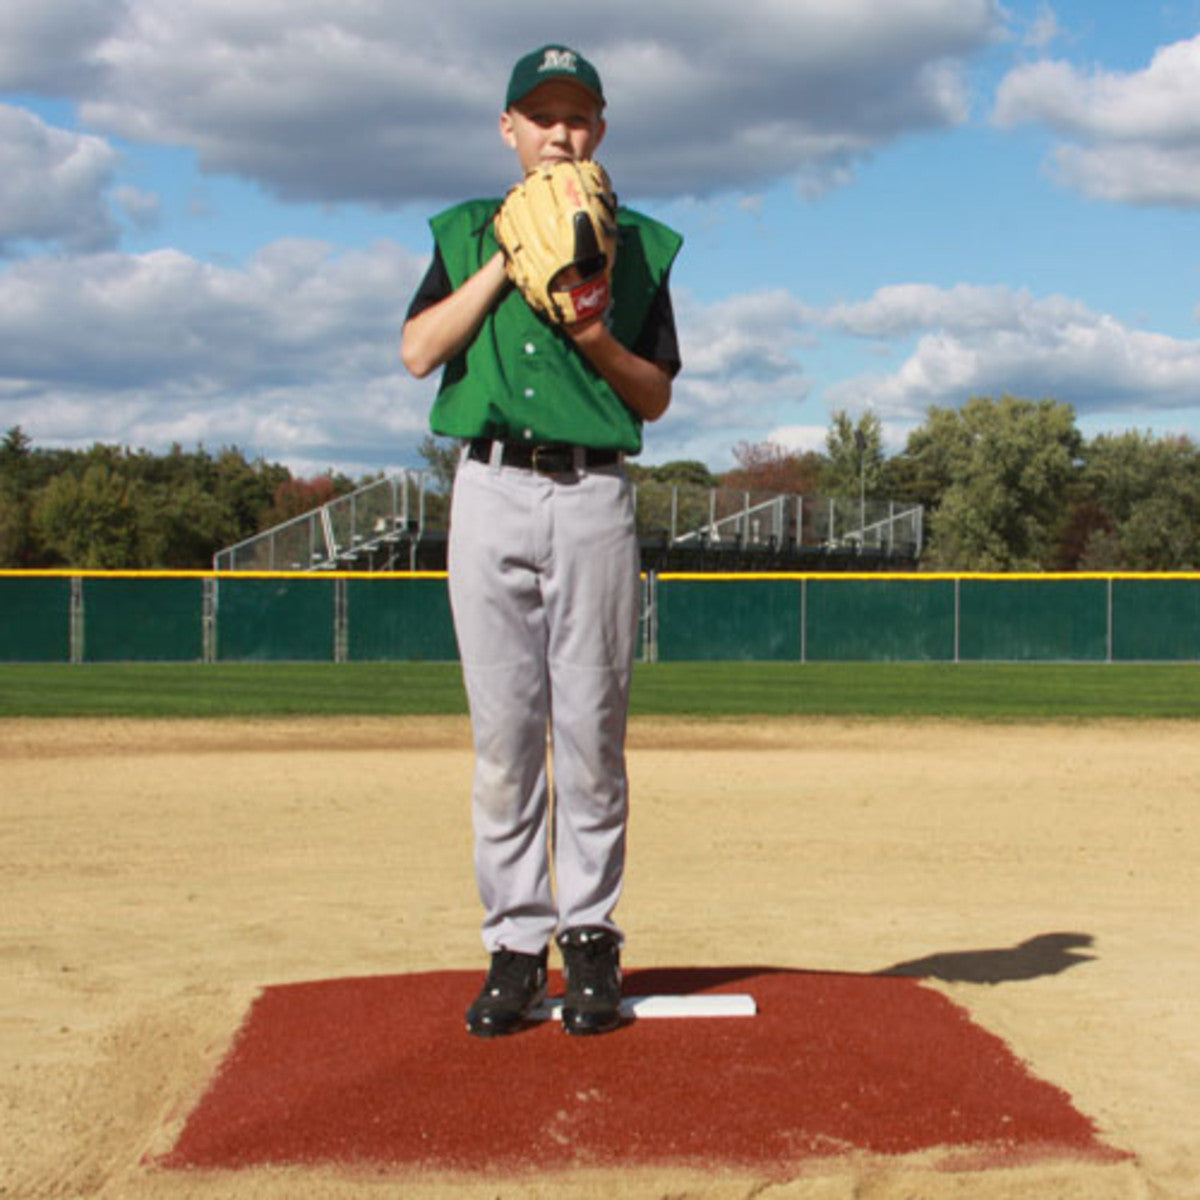 ProMounds 6" Bronco Youth League Game Pitching Mound clay color pitcher standing front view